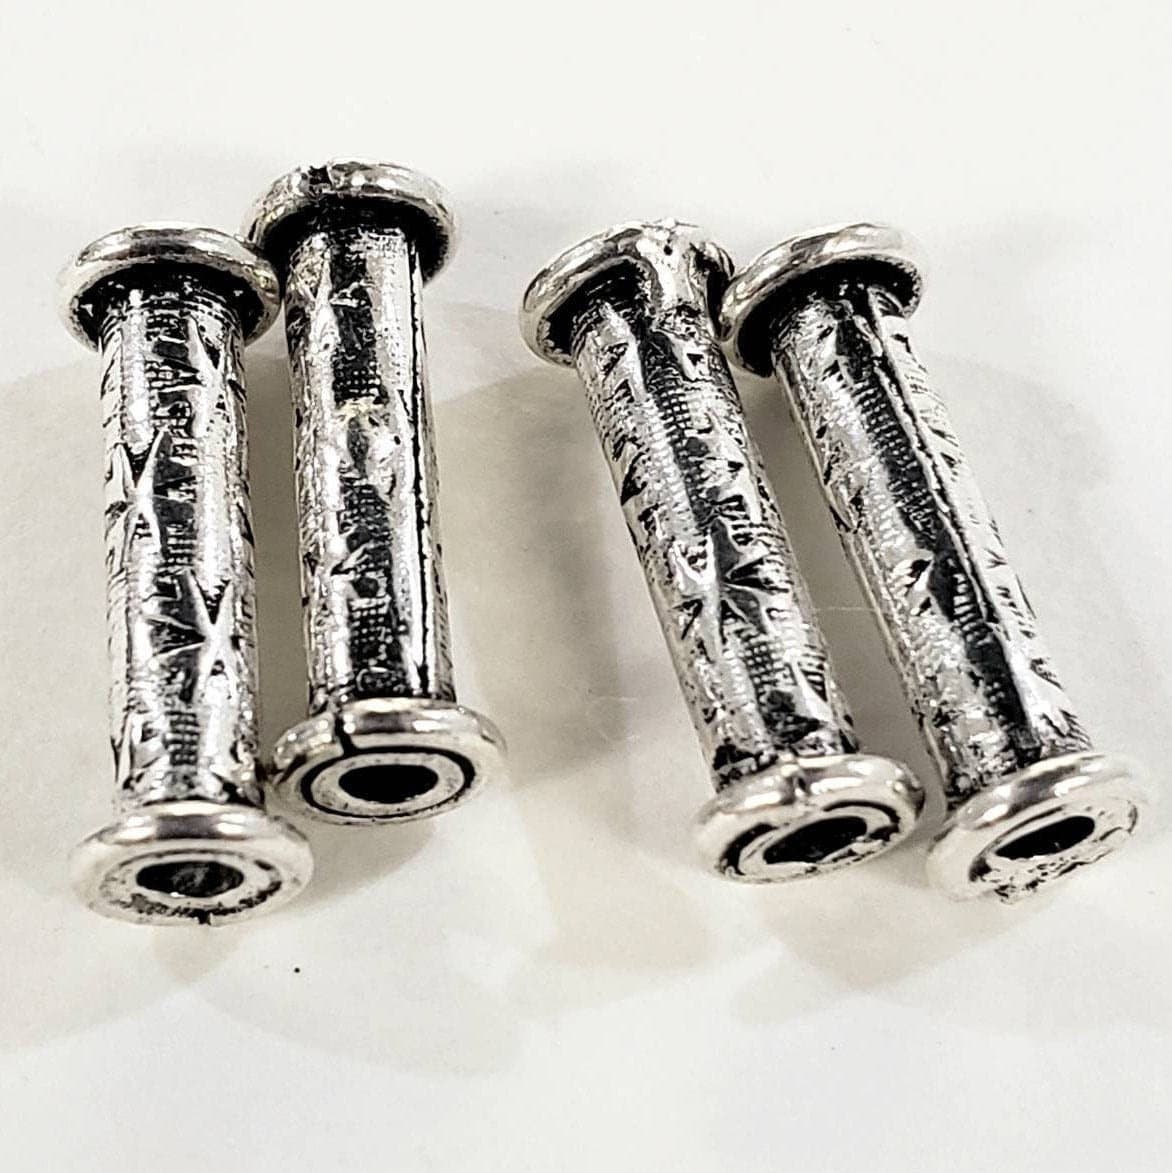 2 Pieces 925 Sterling Silver Bali tube 3x16mm handmade textures vintage spacer for jewelry making Necklace Bracelet earrings supplies.